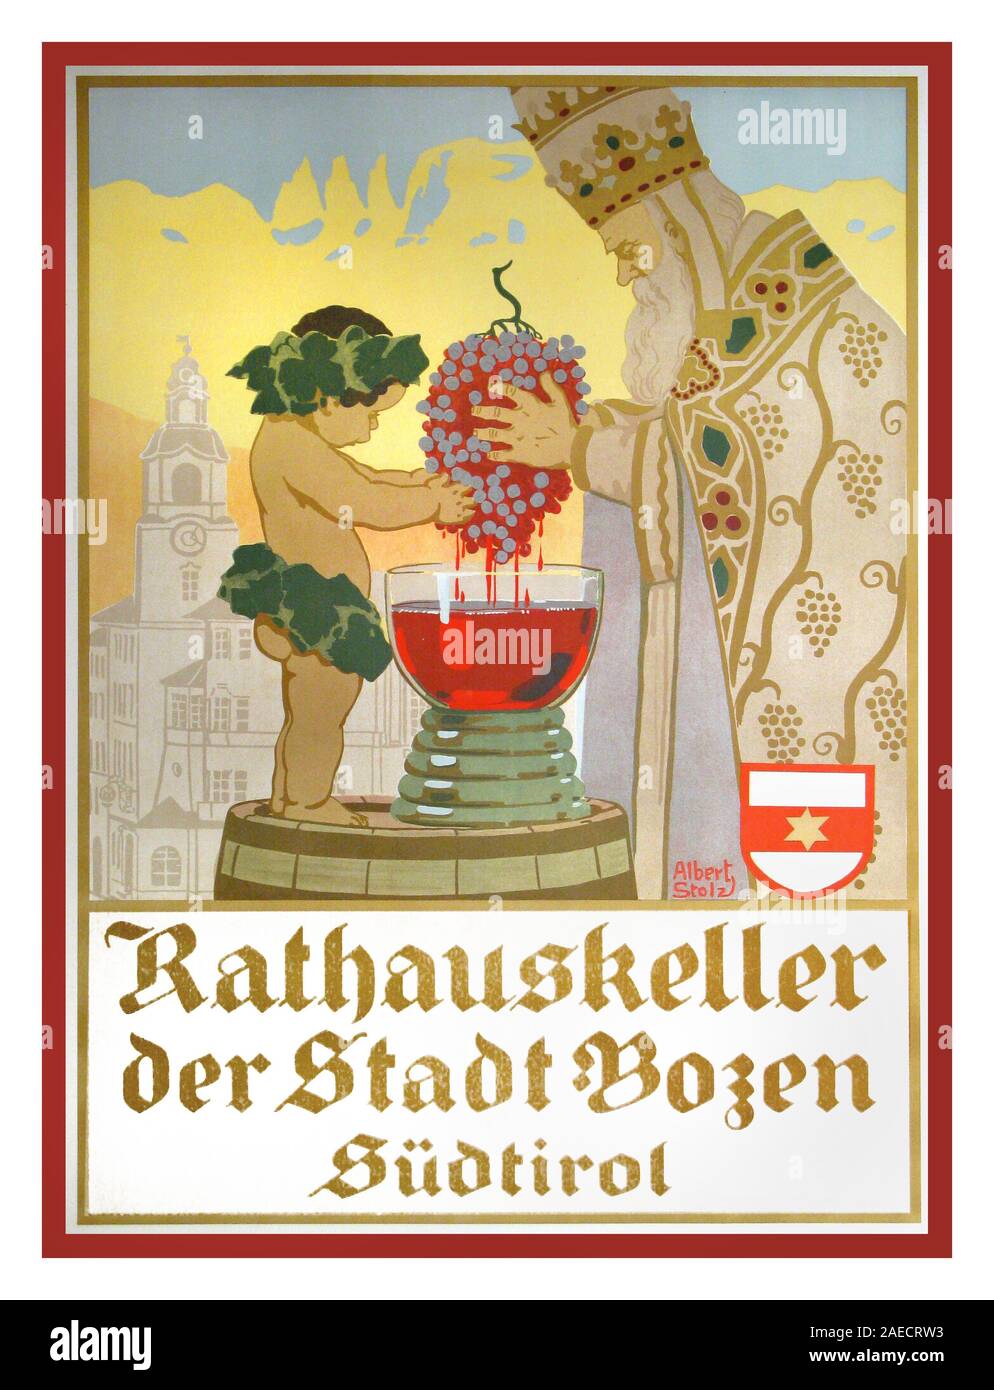 Albert Stolz  1900's Vintage Wine Poster by Albert Stolz Rathauskeller, vintage wine poster made in the  Arts and Crafts style, Lithograph,  Print Lorenz Fränzel, Bolzano Manifesto 'Town Hall of the City of Bolzano', 1910  Stampa Lorenz Fränzel, Bolzano Stock Photo